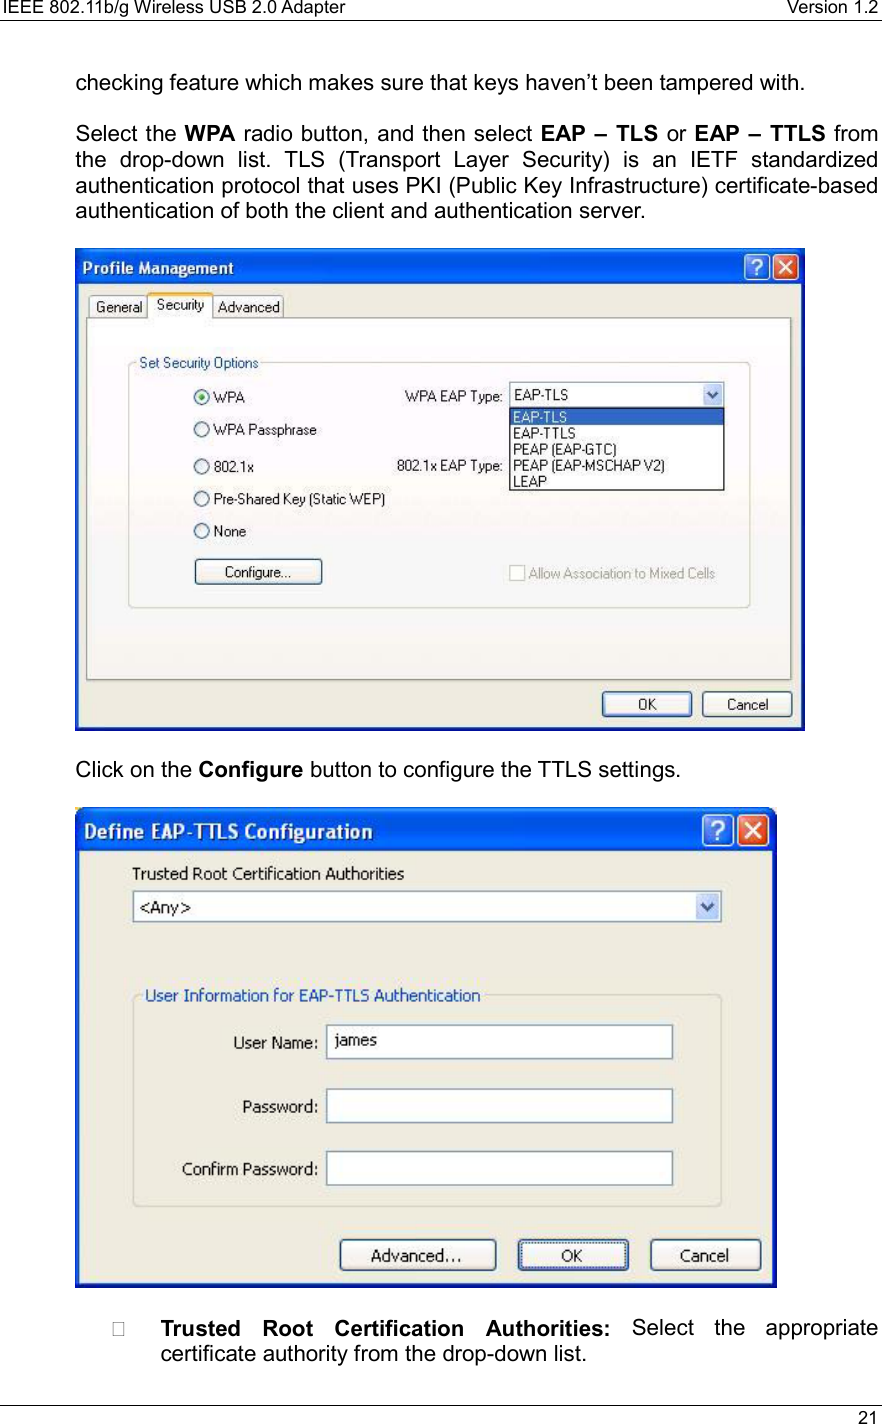 IEEE 802.11b/g Wireless USB 2.0 Adapter    Version 1.2   21  checking feature which makes sure that keys haven’t been tampered with.  Select the WPA radio button, and then select EAP – TLS or EAP – TTLS from the drop-down list. TLS (Transport Layer Security) is an IETF standardized authentication protocol that uses PKI (Public Key Infrastructure) certificate-based authentication of both the client and authentication server.    Click on the Configure button to configure the TTLS settings.      Trusted Root Certification Authorities: Select the appropriate certificate authority from the drop-down list.   